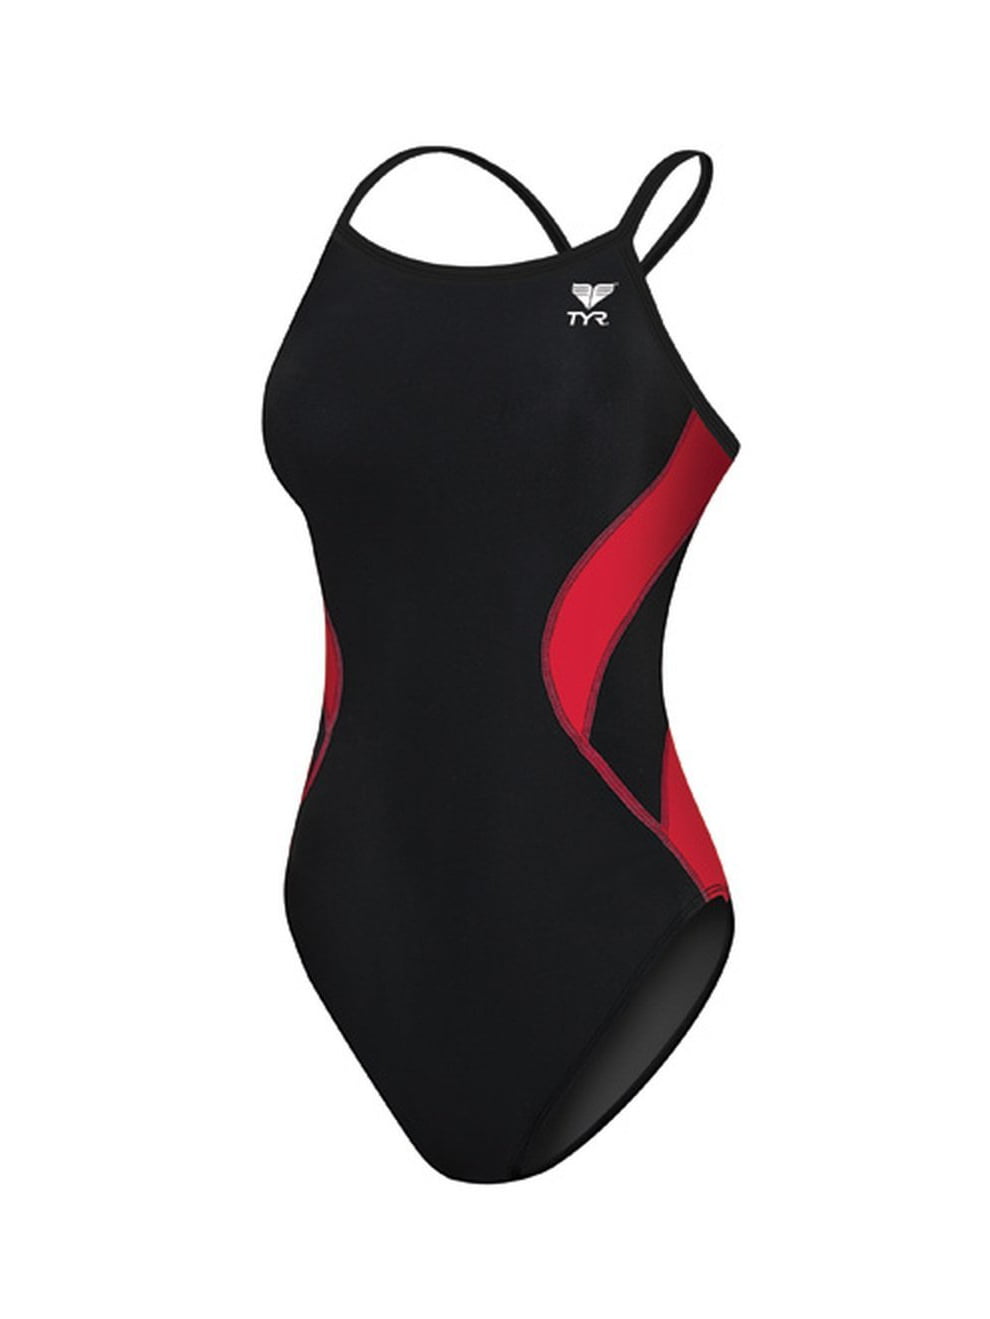 TYR Adult Alliance T-Splice Maxback Swimsuit Womens Size 30 Black & Hot Pink New 